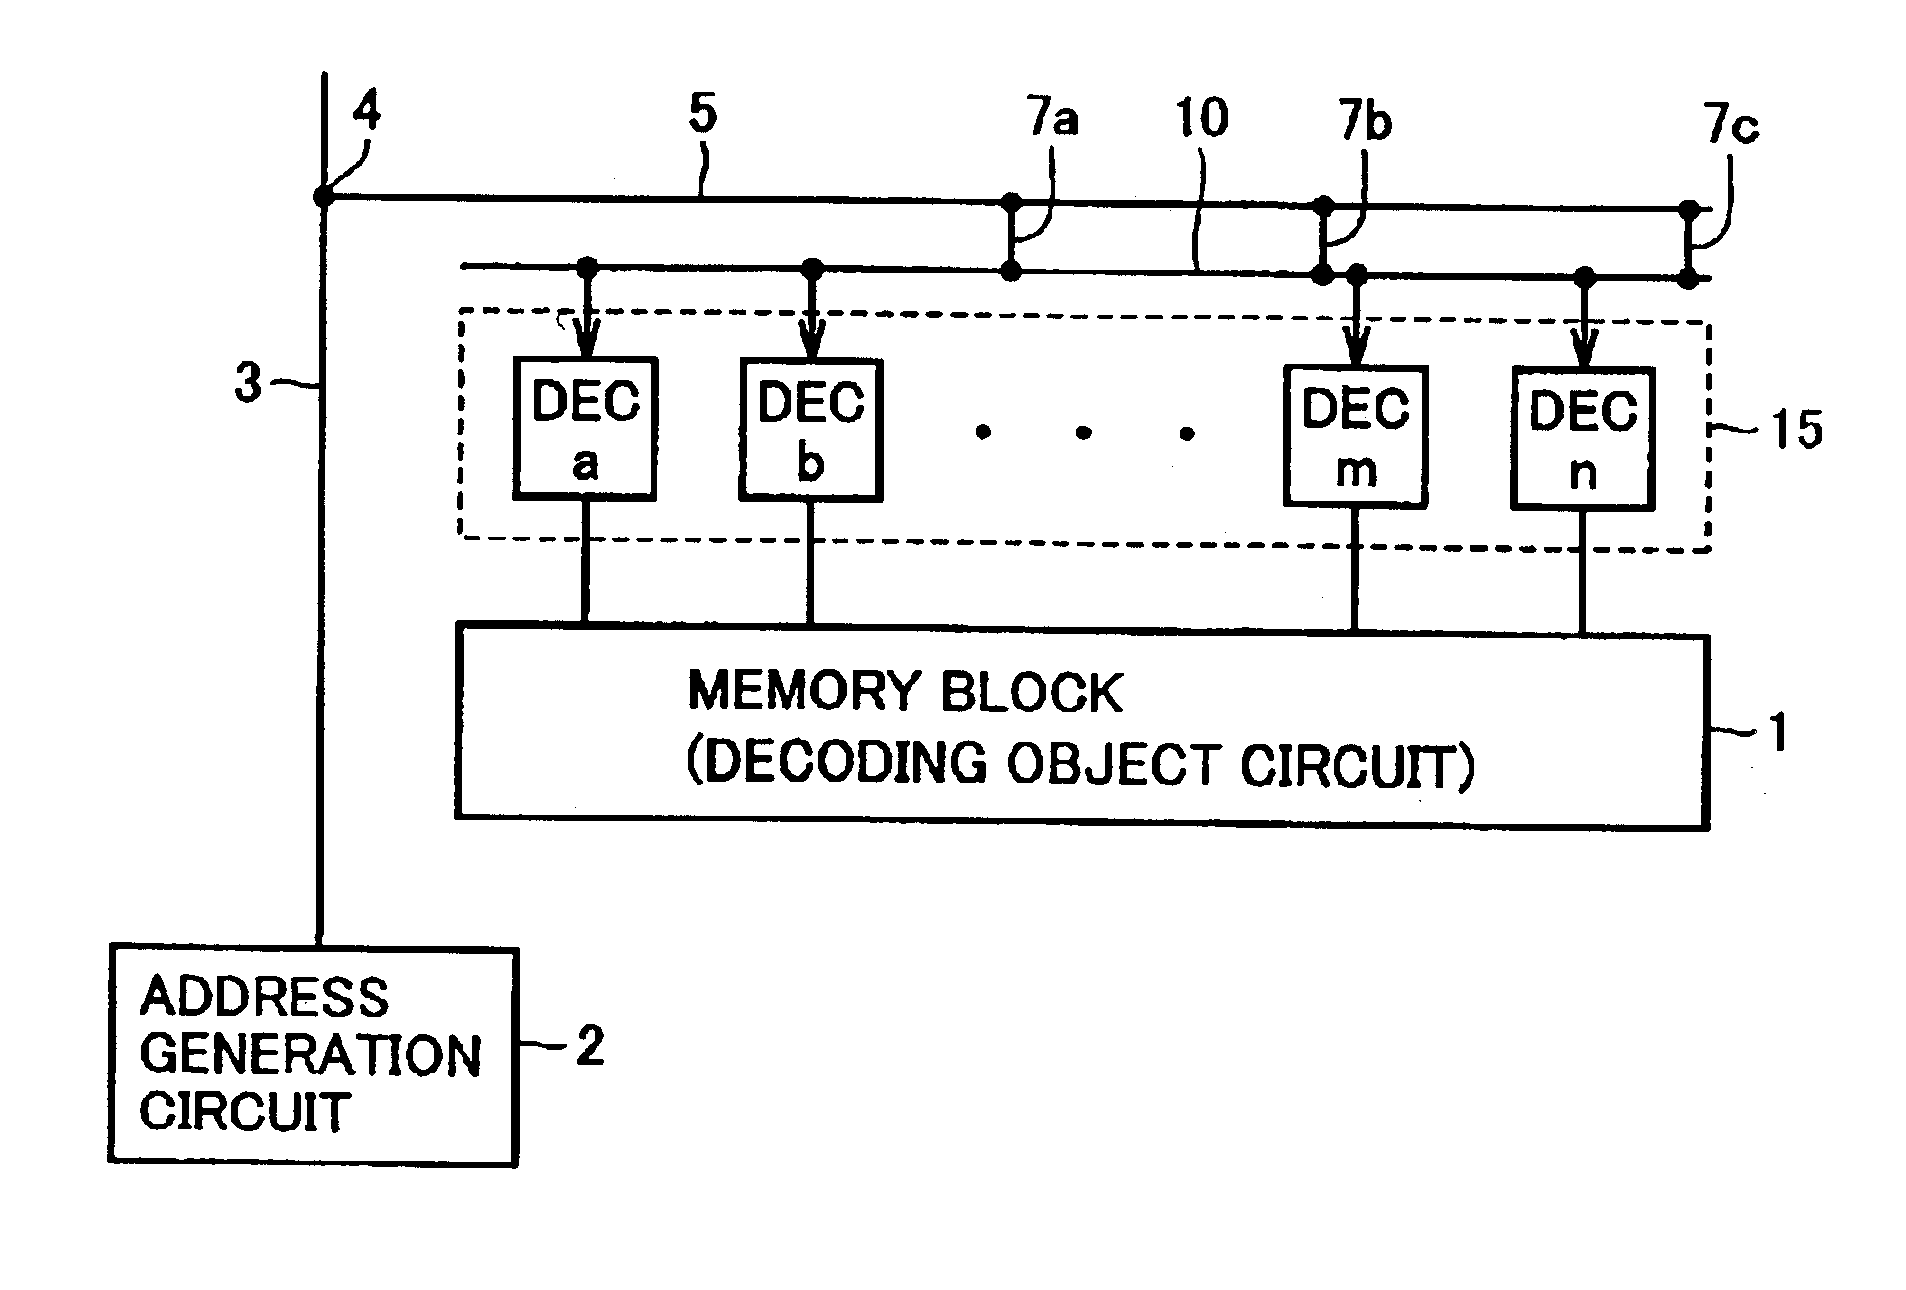 Semiconductor circuit device capable of high speed decoding